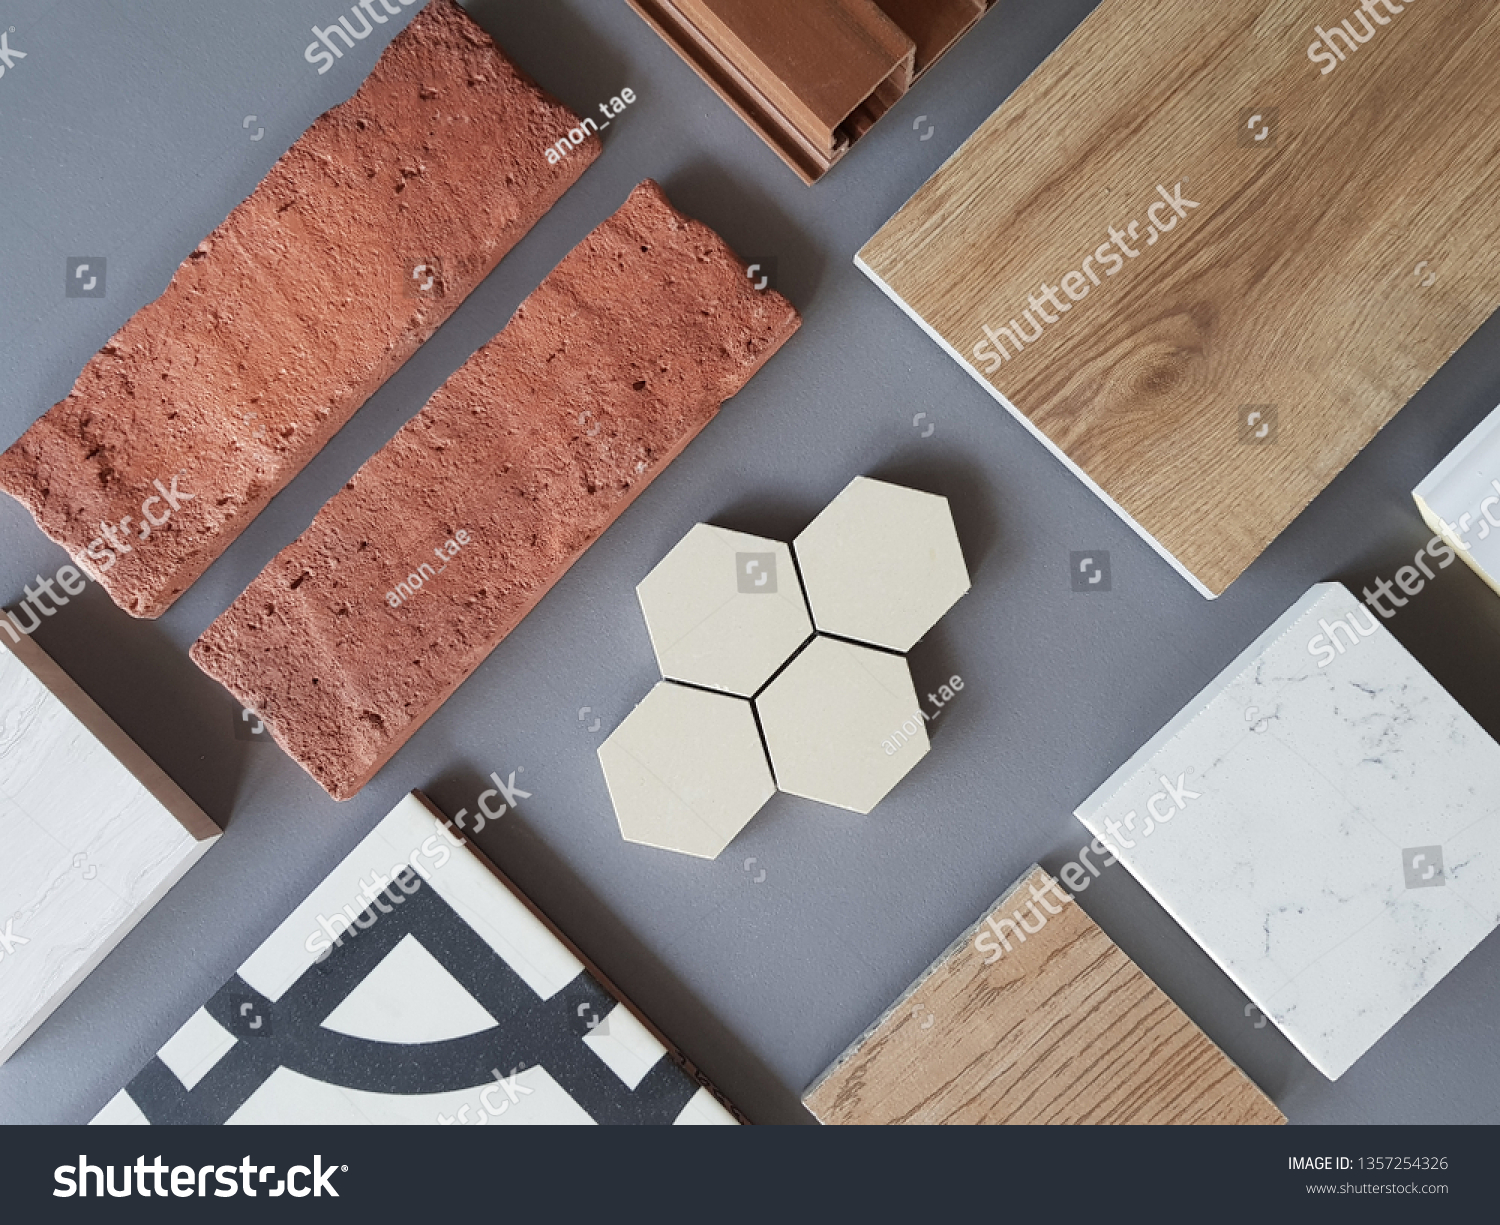  samples of material, wood , on concrete table.Interior design select material for idea. Decoration idea concept vintage material.

 #1357254326